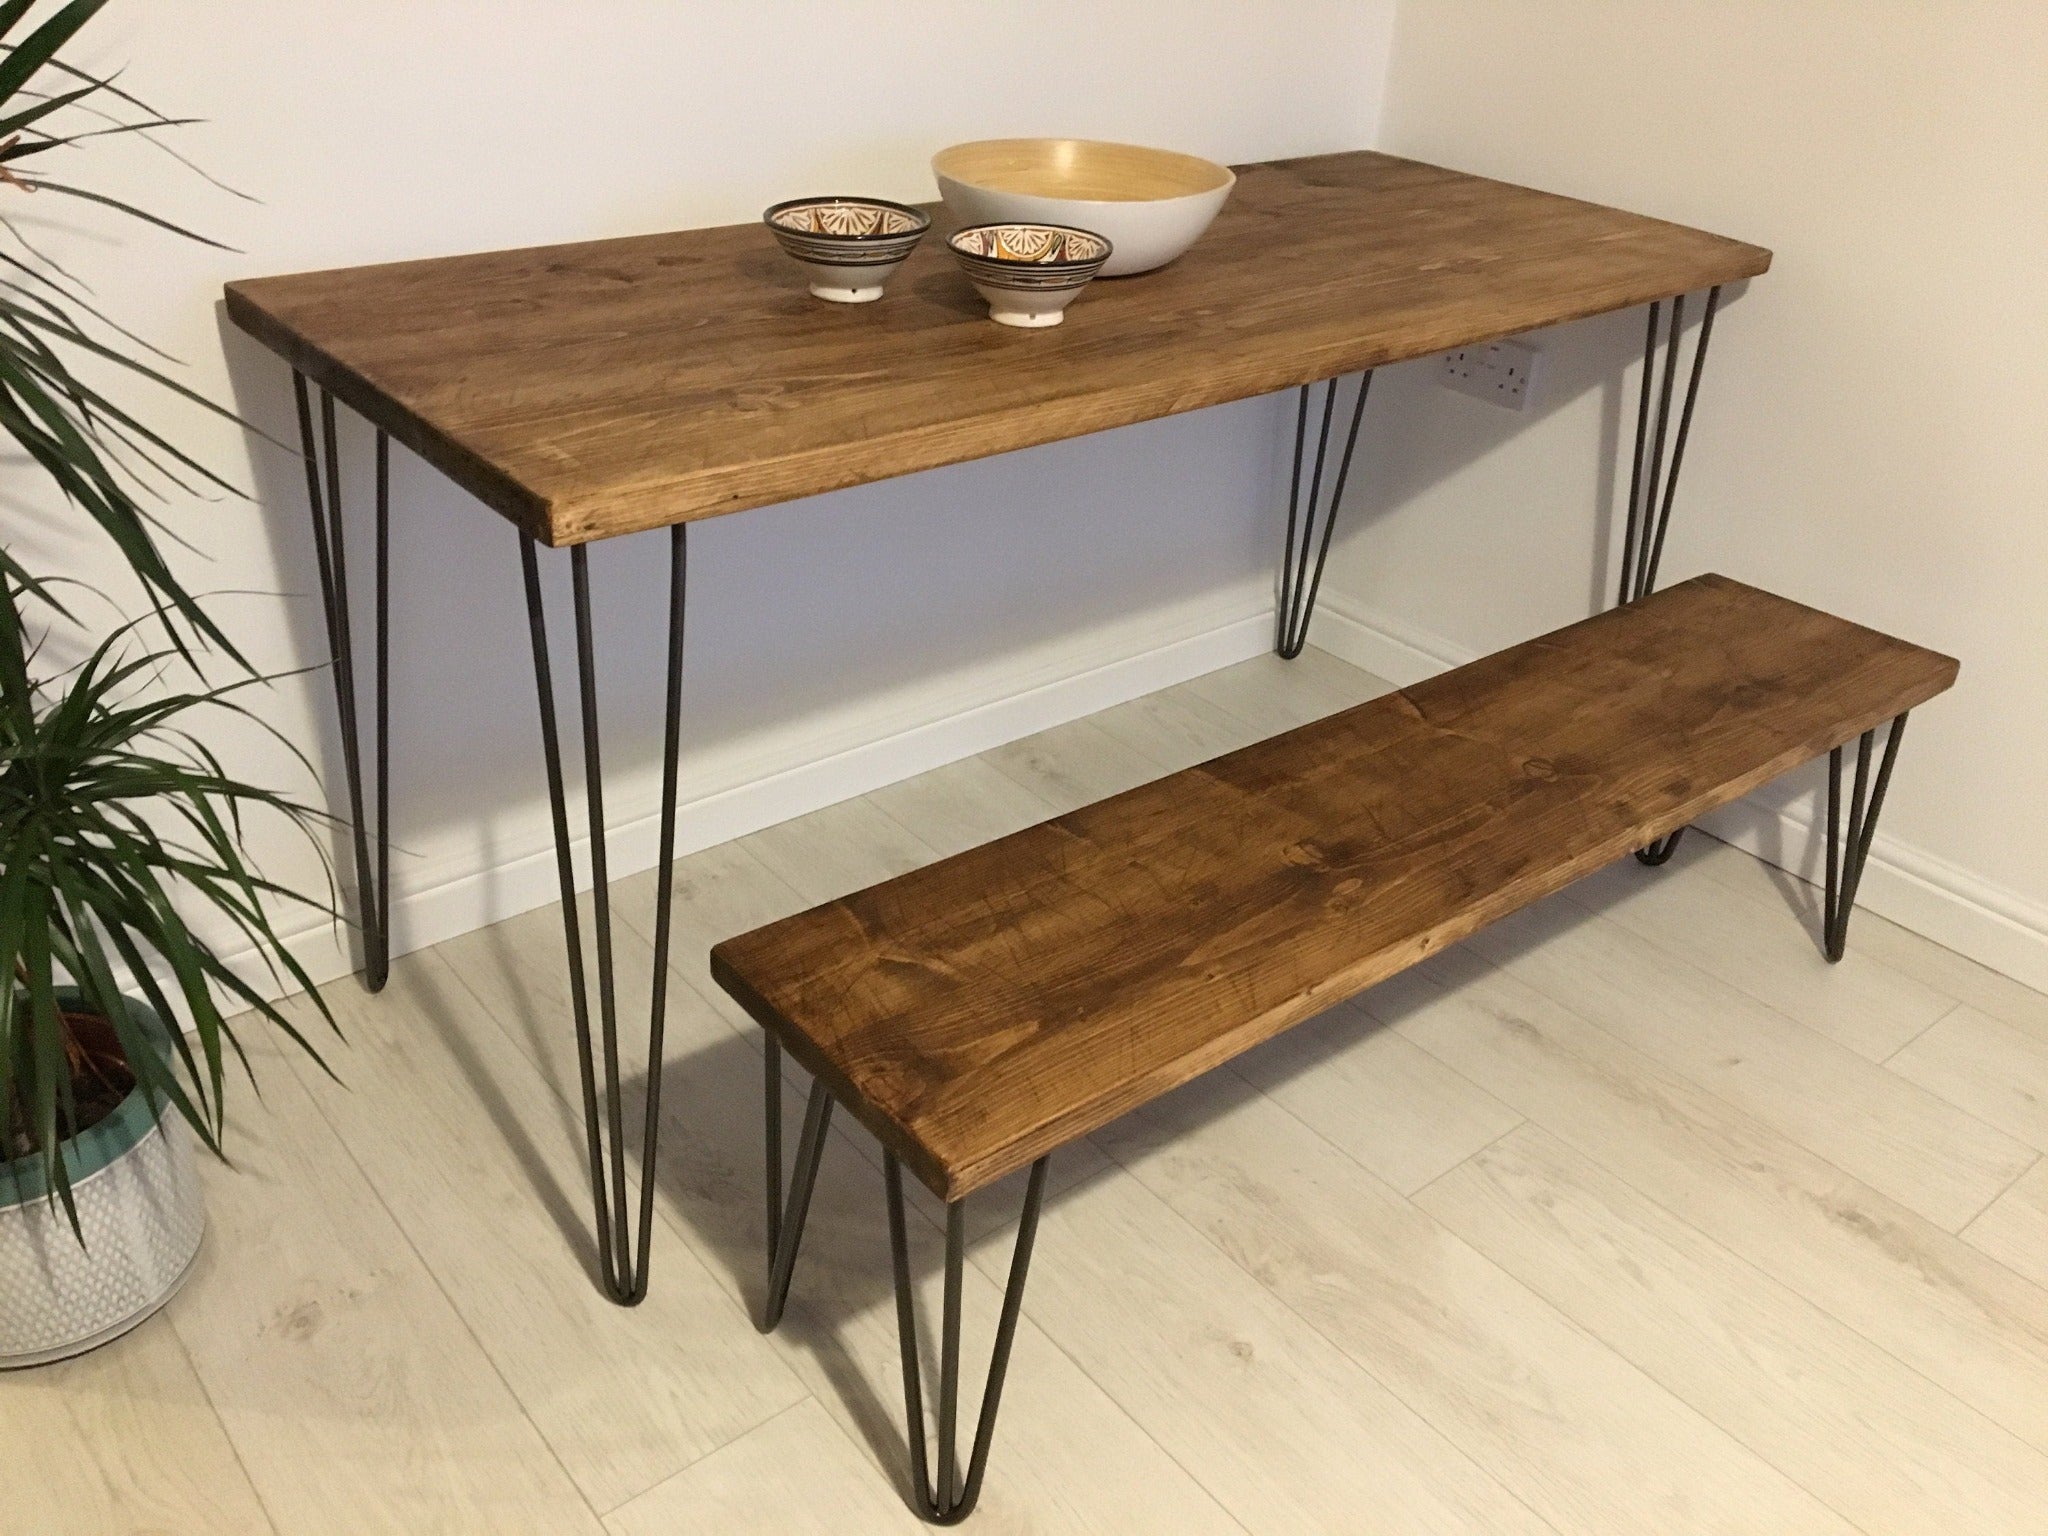 Rustic Reclaimed Wood Dining Table & Benches with Steel Hairpin Legs